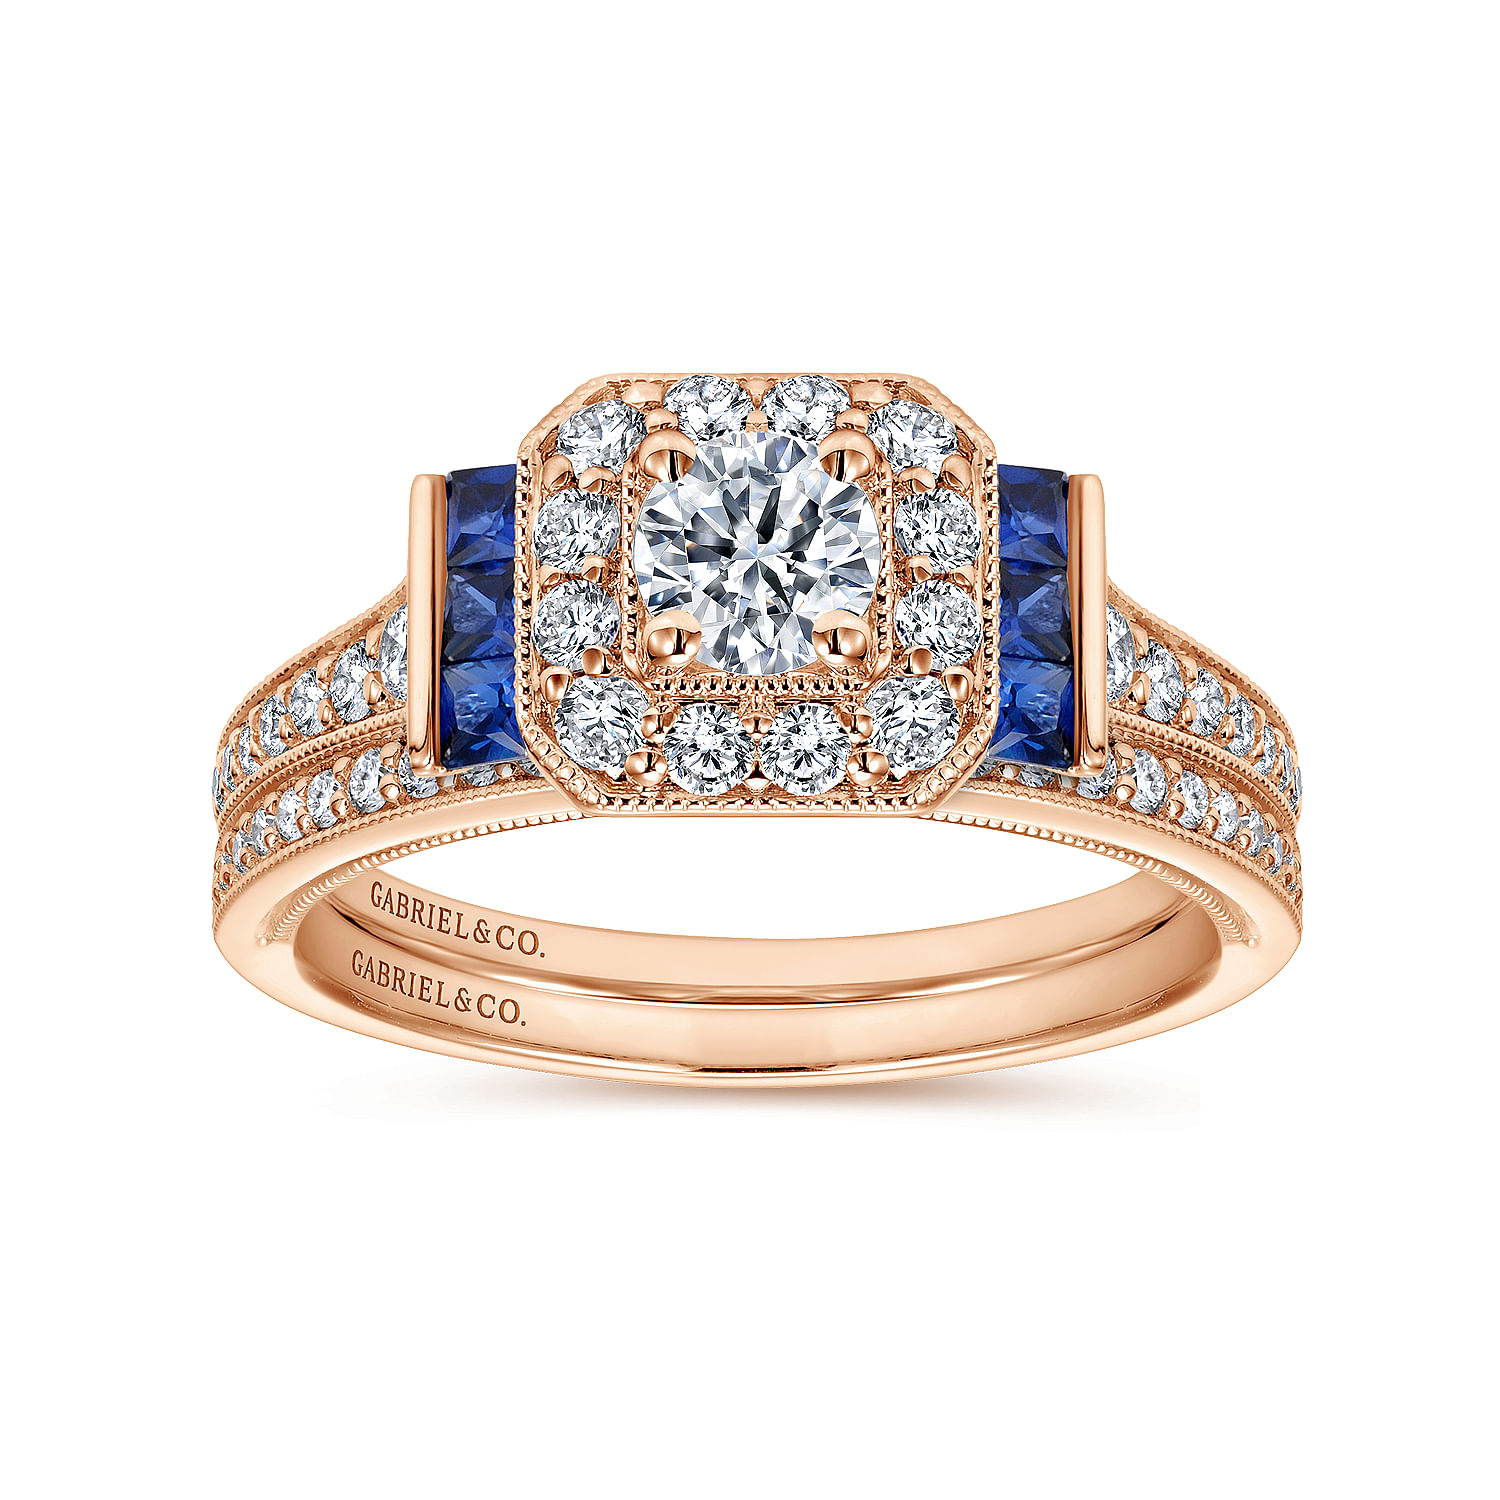 Vintage Inspired 14K Rose Gold Round Halo Diamond and Sapphire Engagement Ring